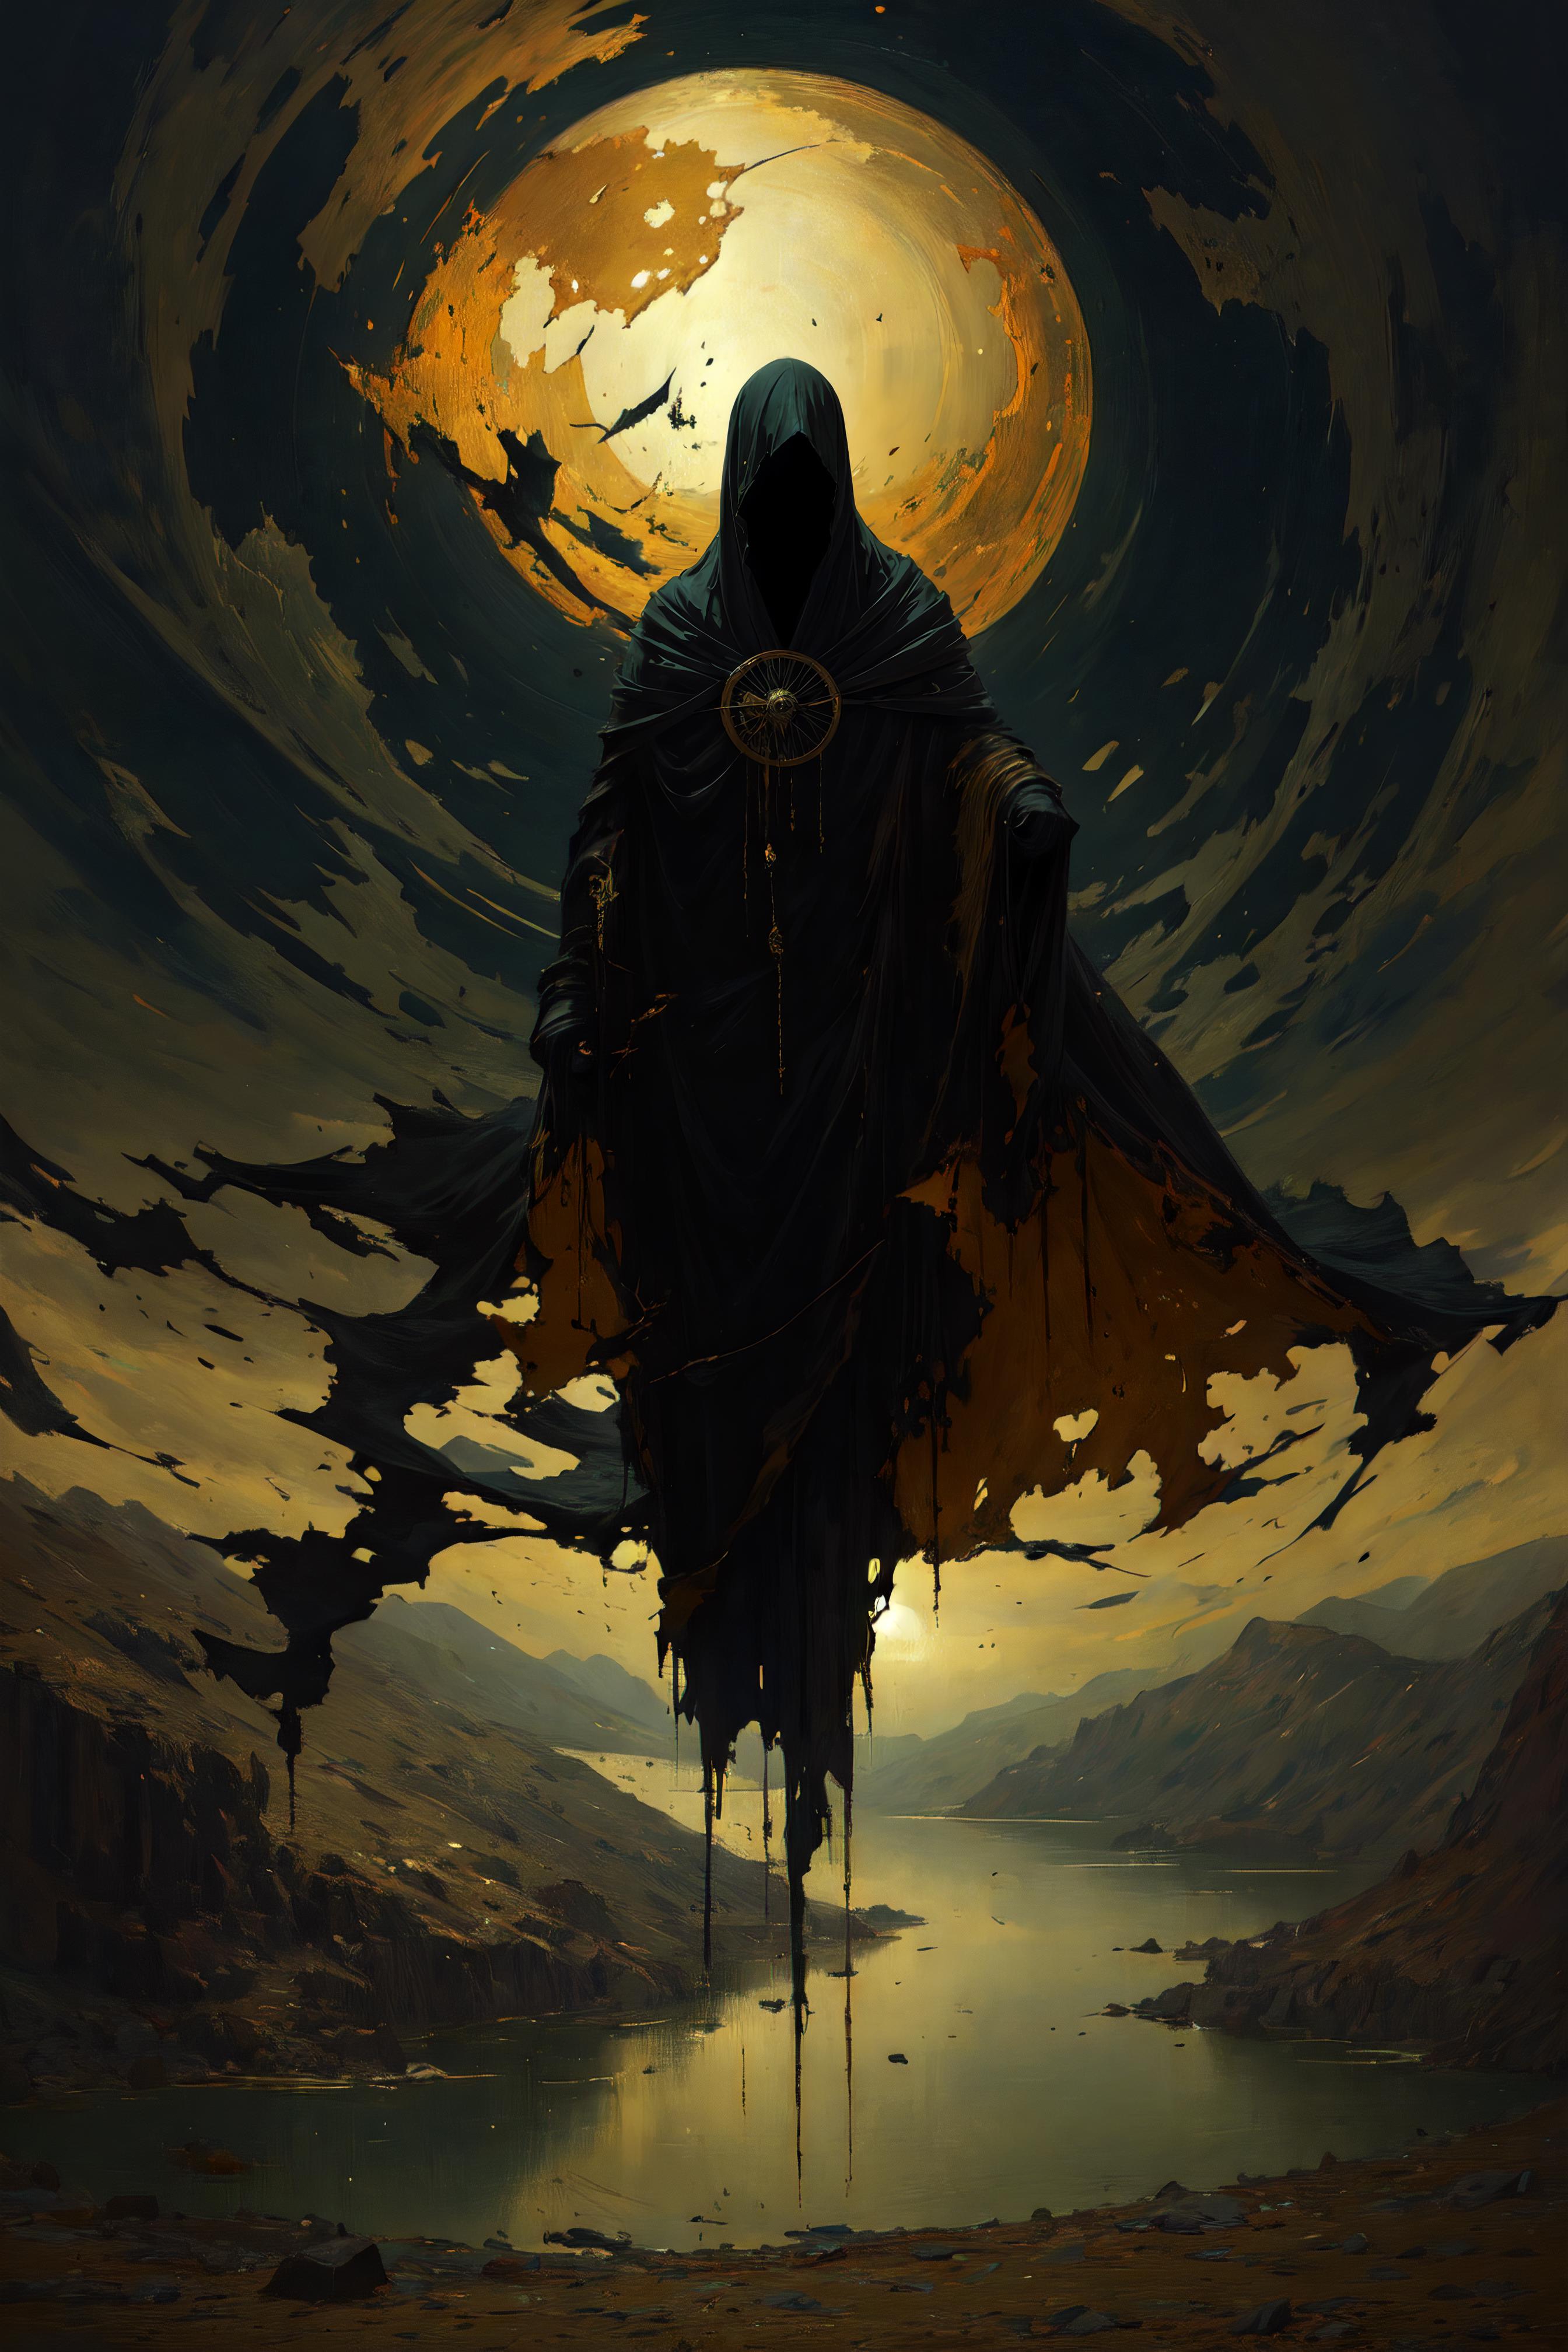 A Dark and Mysterious Painting of a Figure in a Cloak with a Sun in the Background